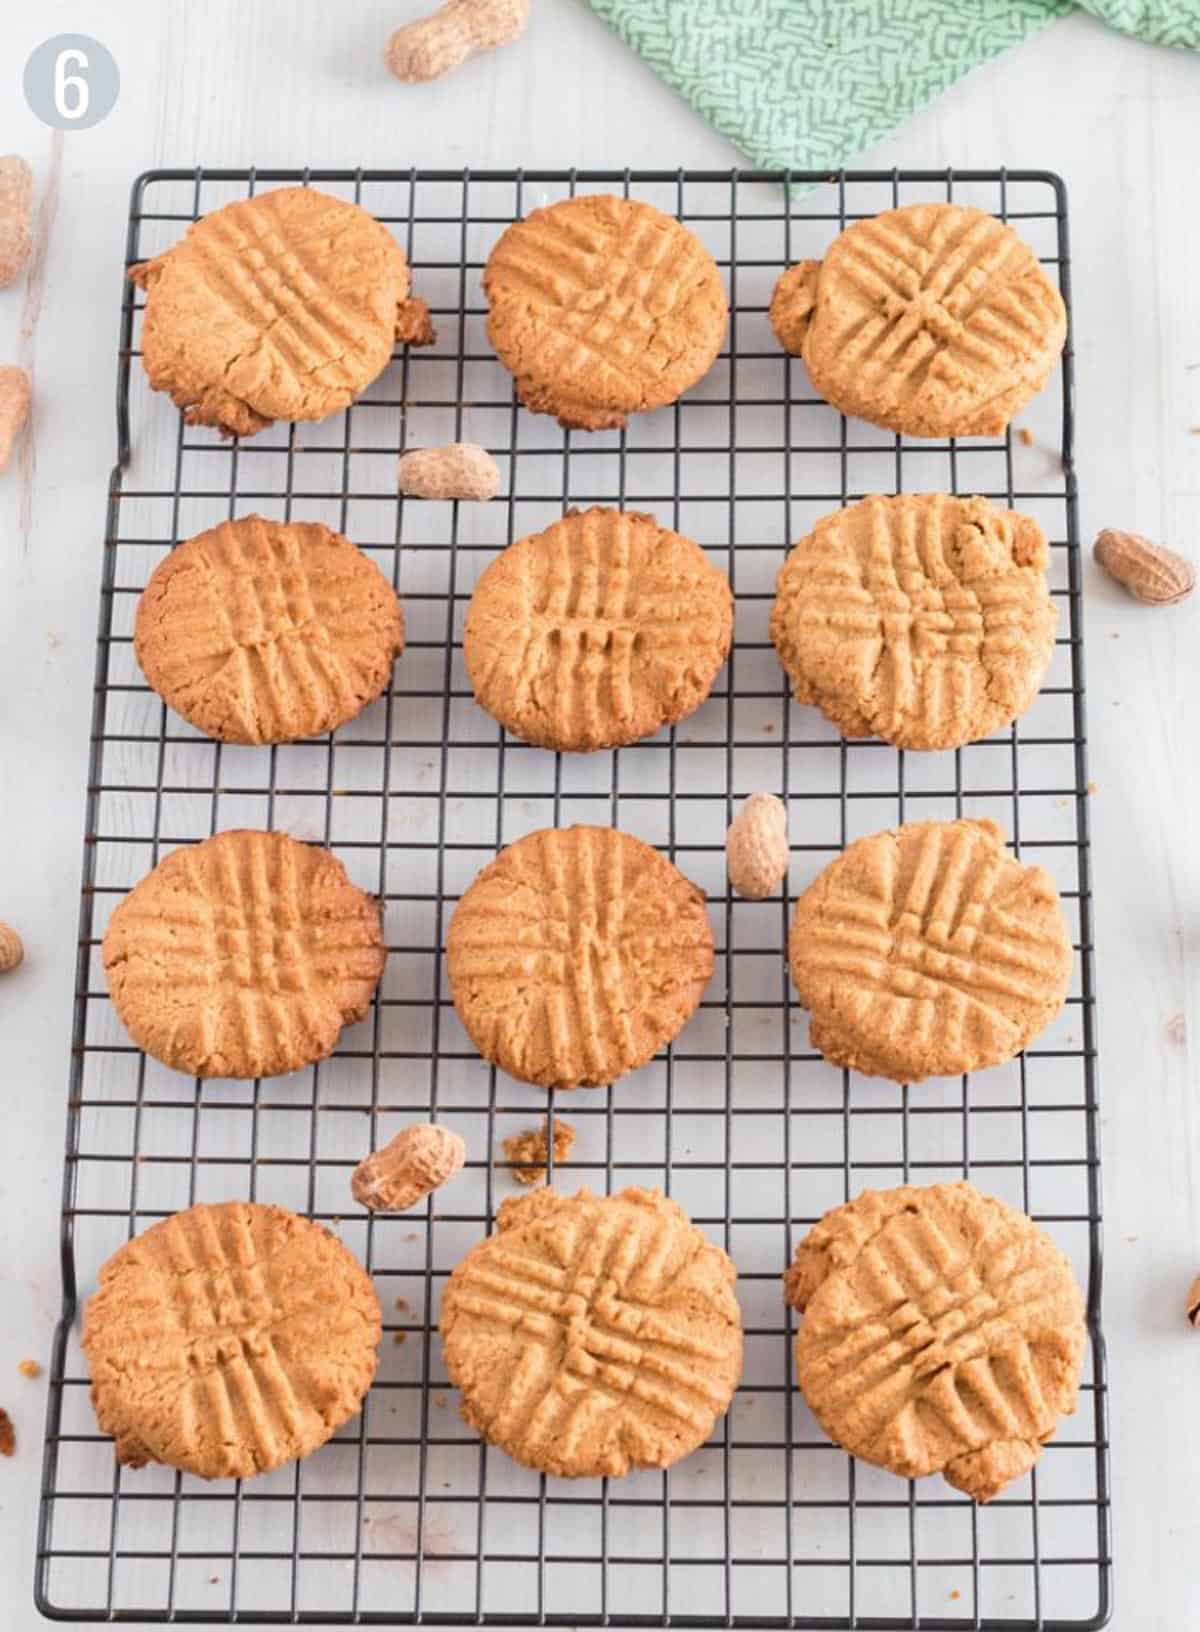 12 peanut butter cookies on a cooling rack.